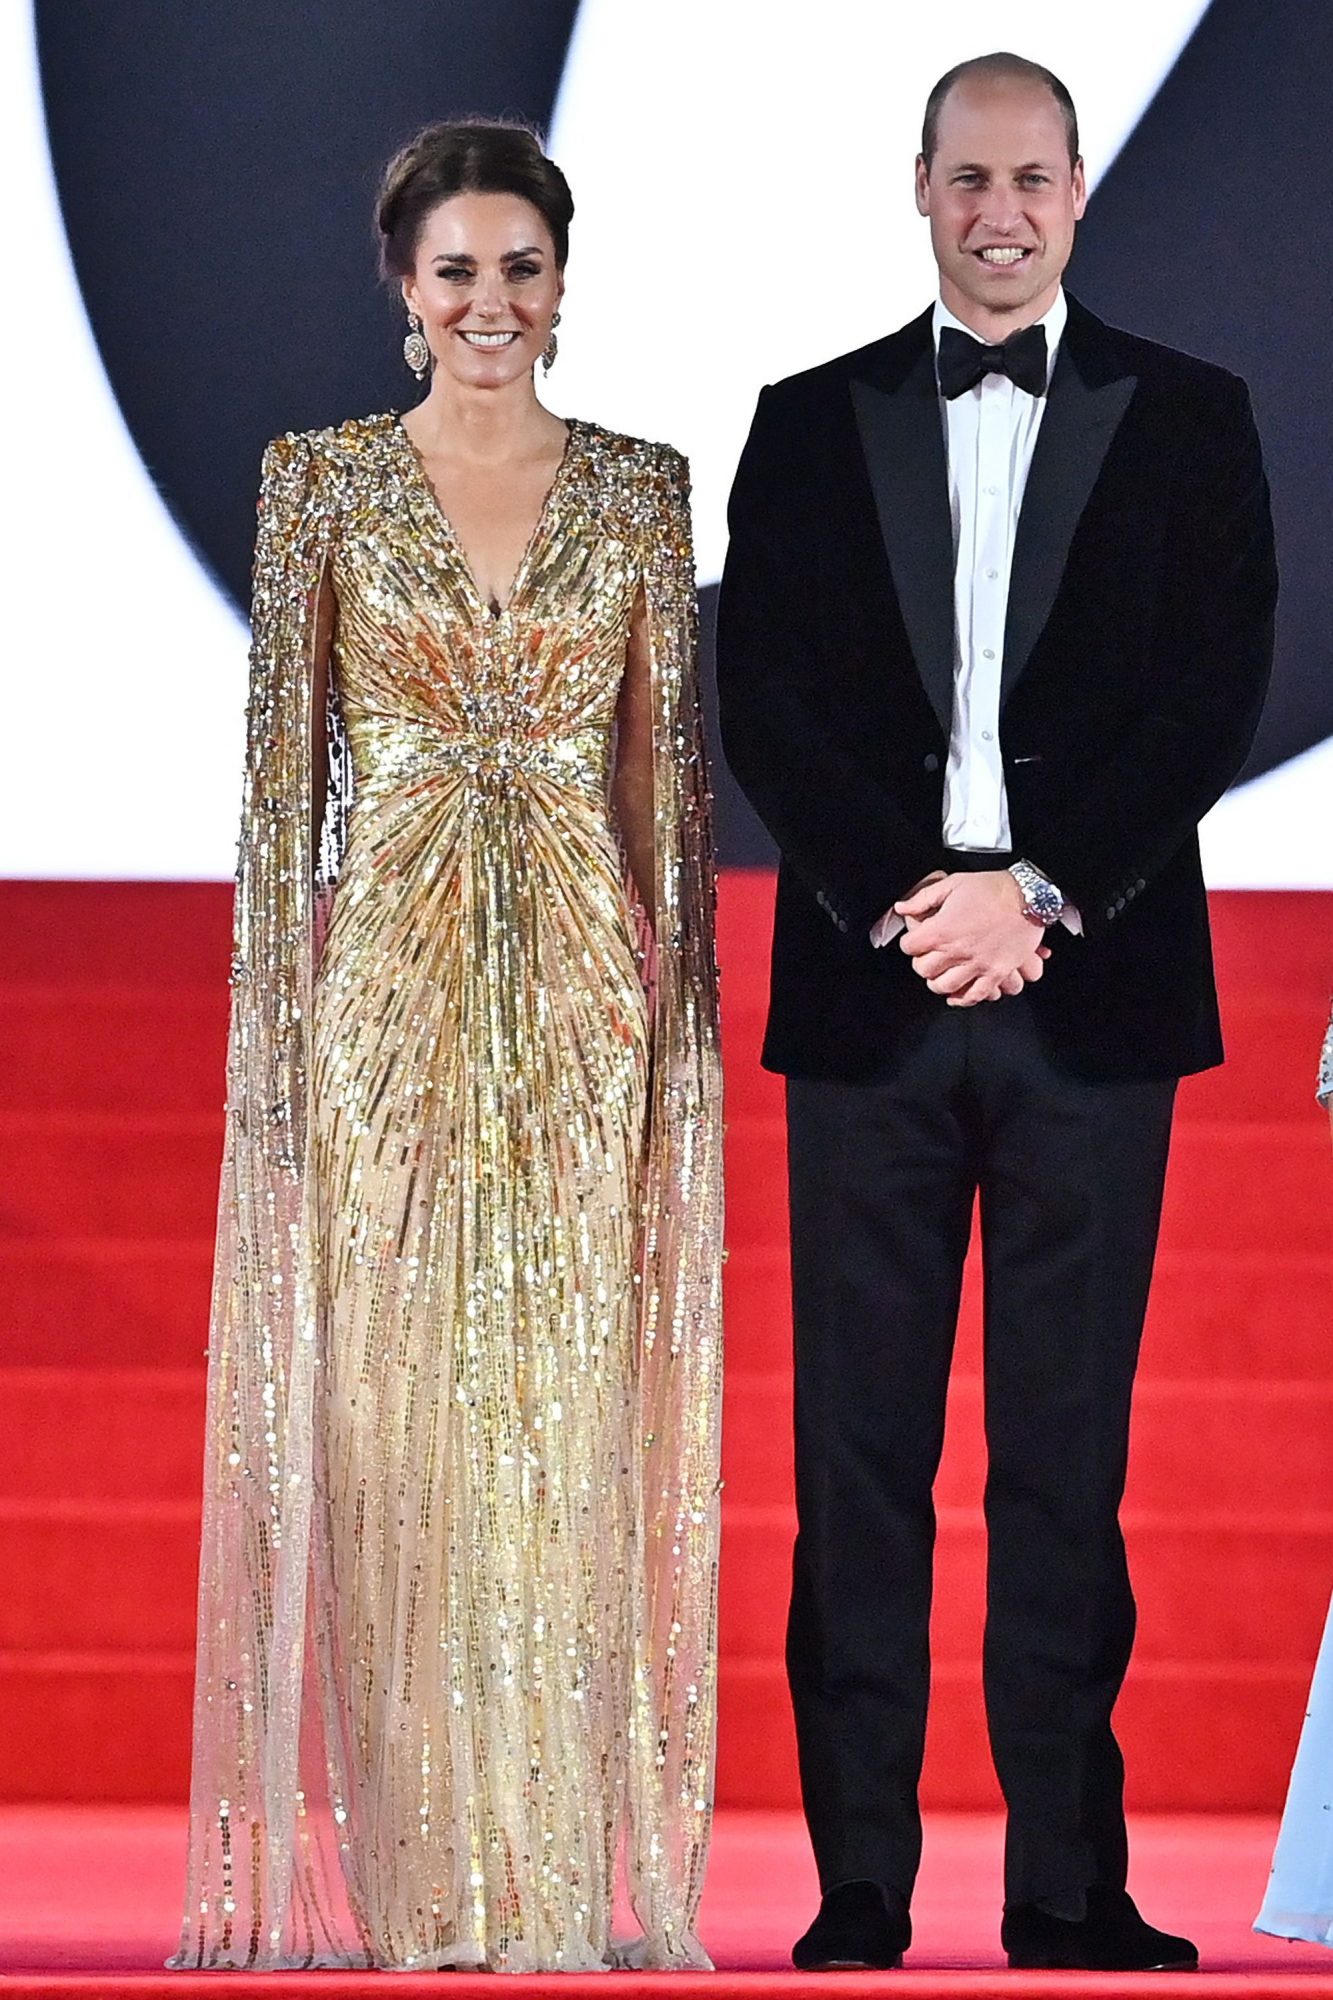 Kate Middleton’s Bond Gown ‘signals start of big change for future Queen’